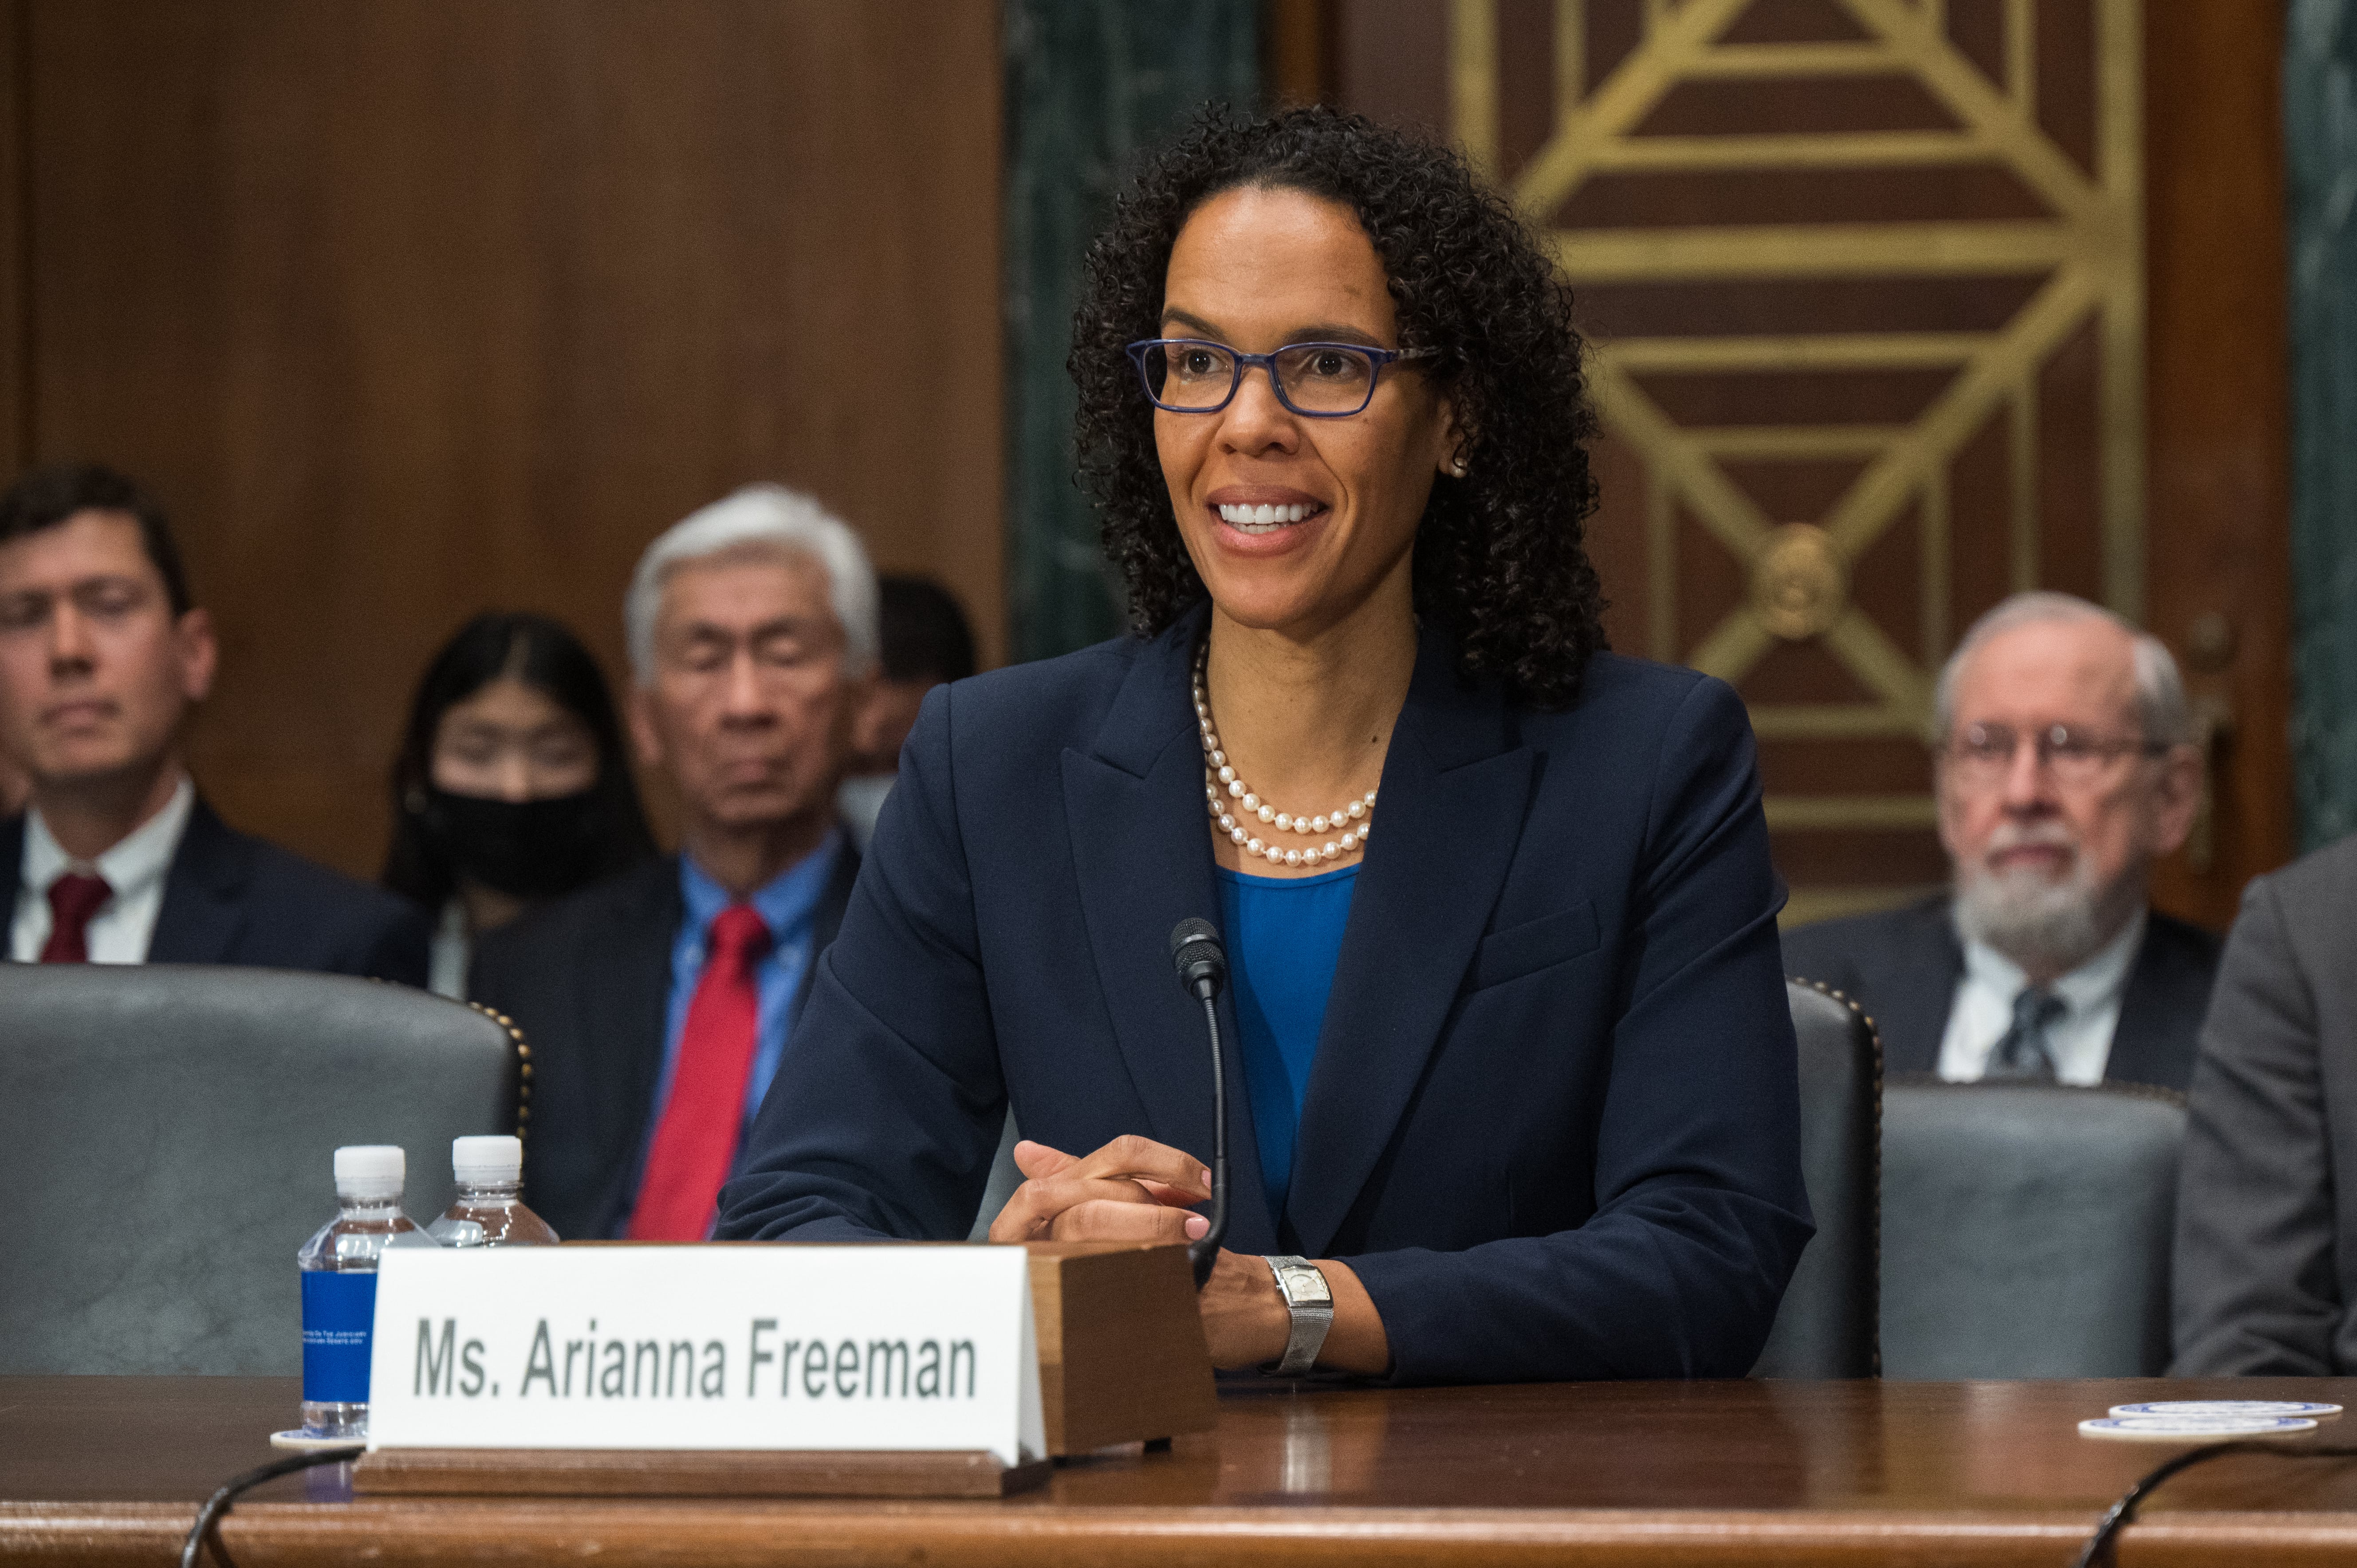 Arianna Freeman, a nominee to serve as a judge on the 3rd U.S. Circuit Court of Appeals, appears before the U.S. Senate Judiciary Committee on March 2, 2022, in Washington, D.C. U.S. Senate/Handout via REUTERS